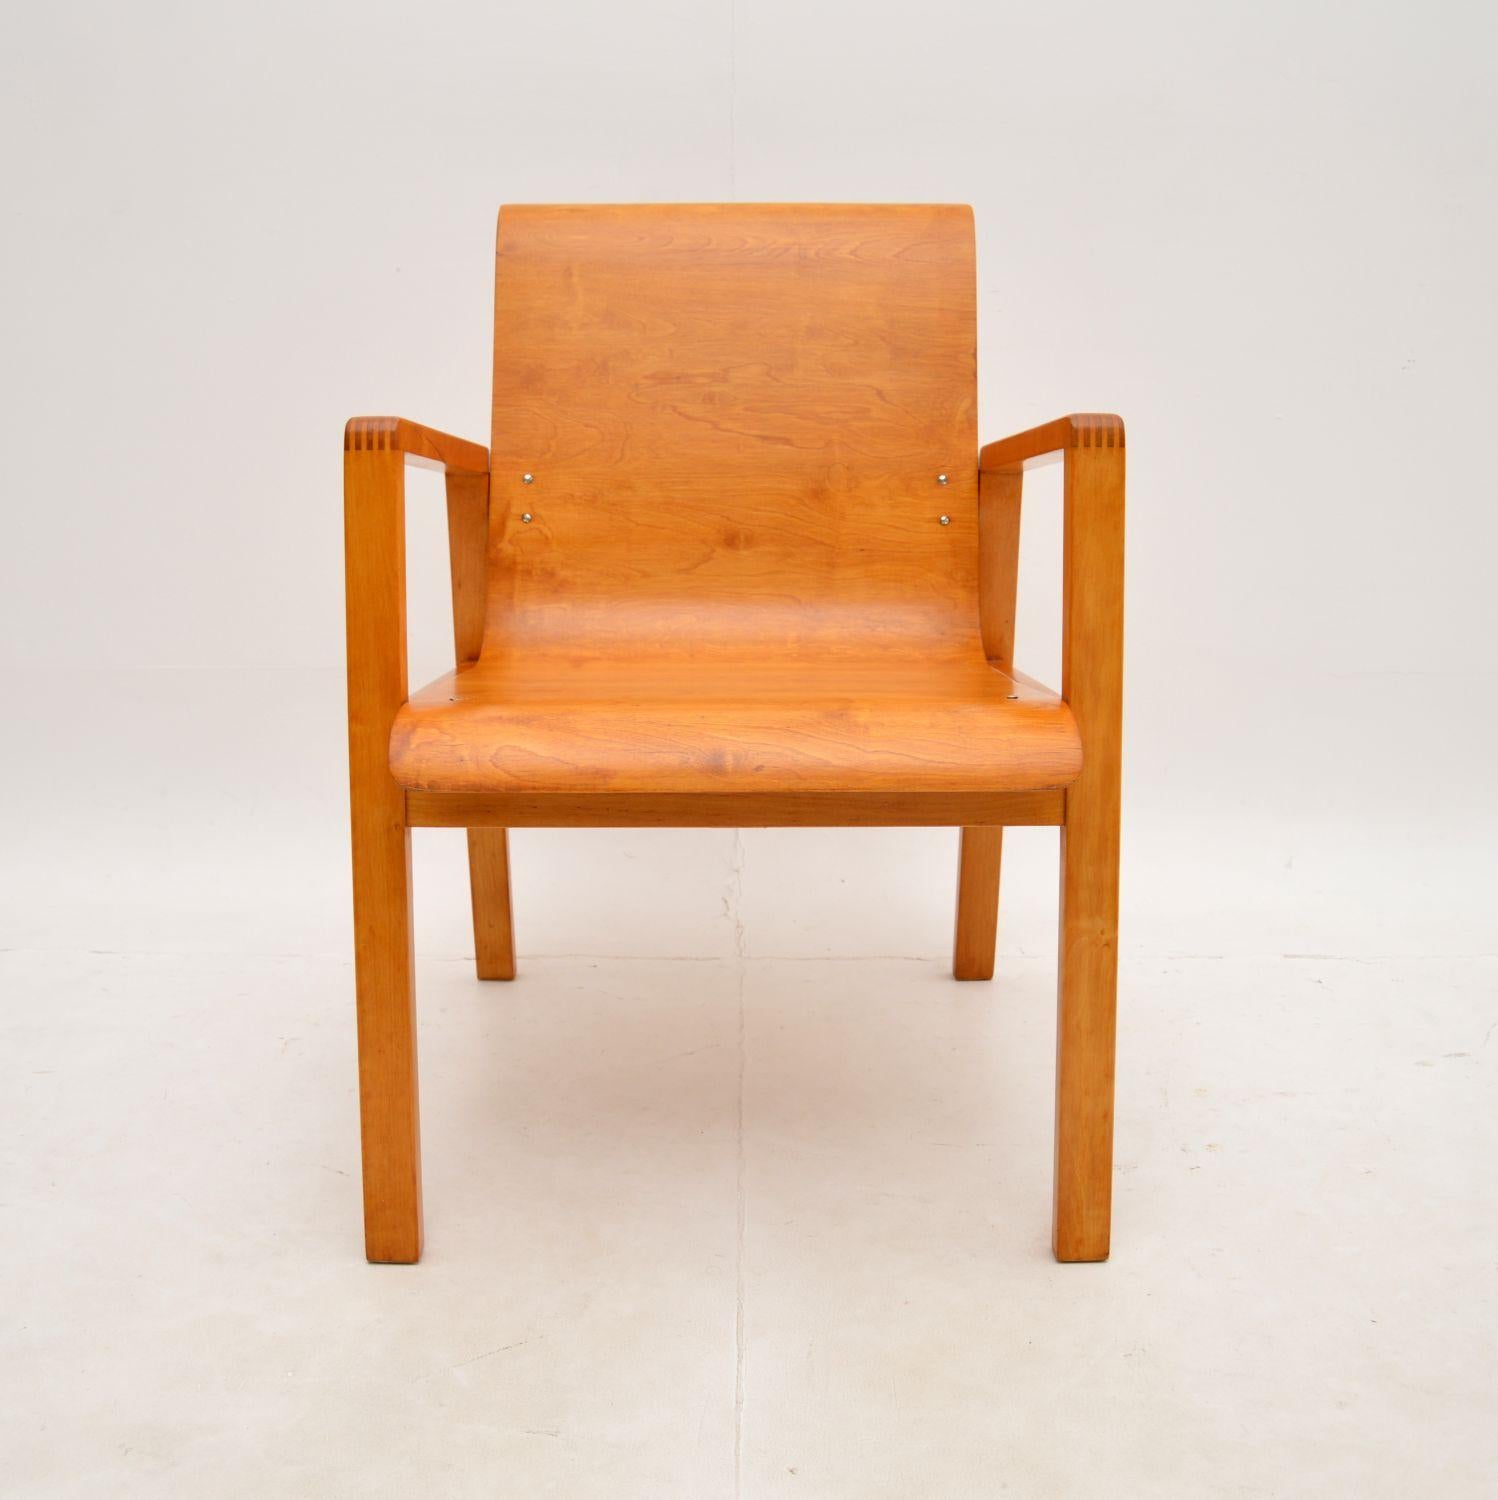 A stunning and iconic early vintage Alvar Aalto Hallway chair model 403. This was originally designed in 1929, this model is early and dates from around the 1930-50’s. It was made in Finland by Finmar.

When we obtained this, someone had painted it